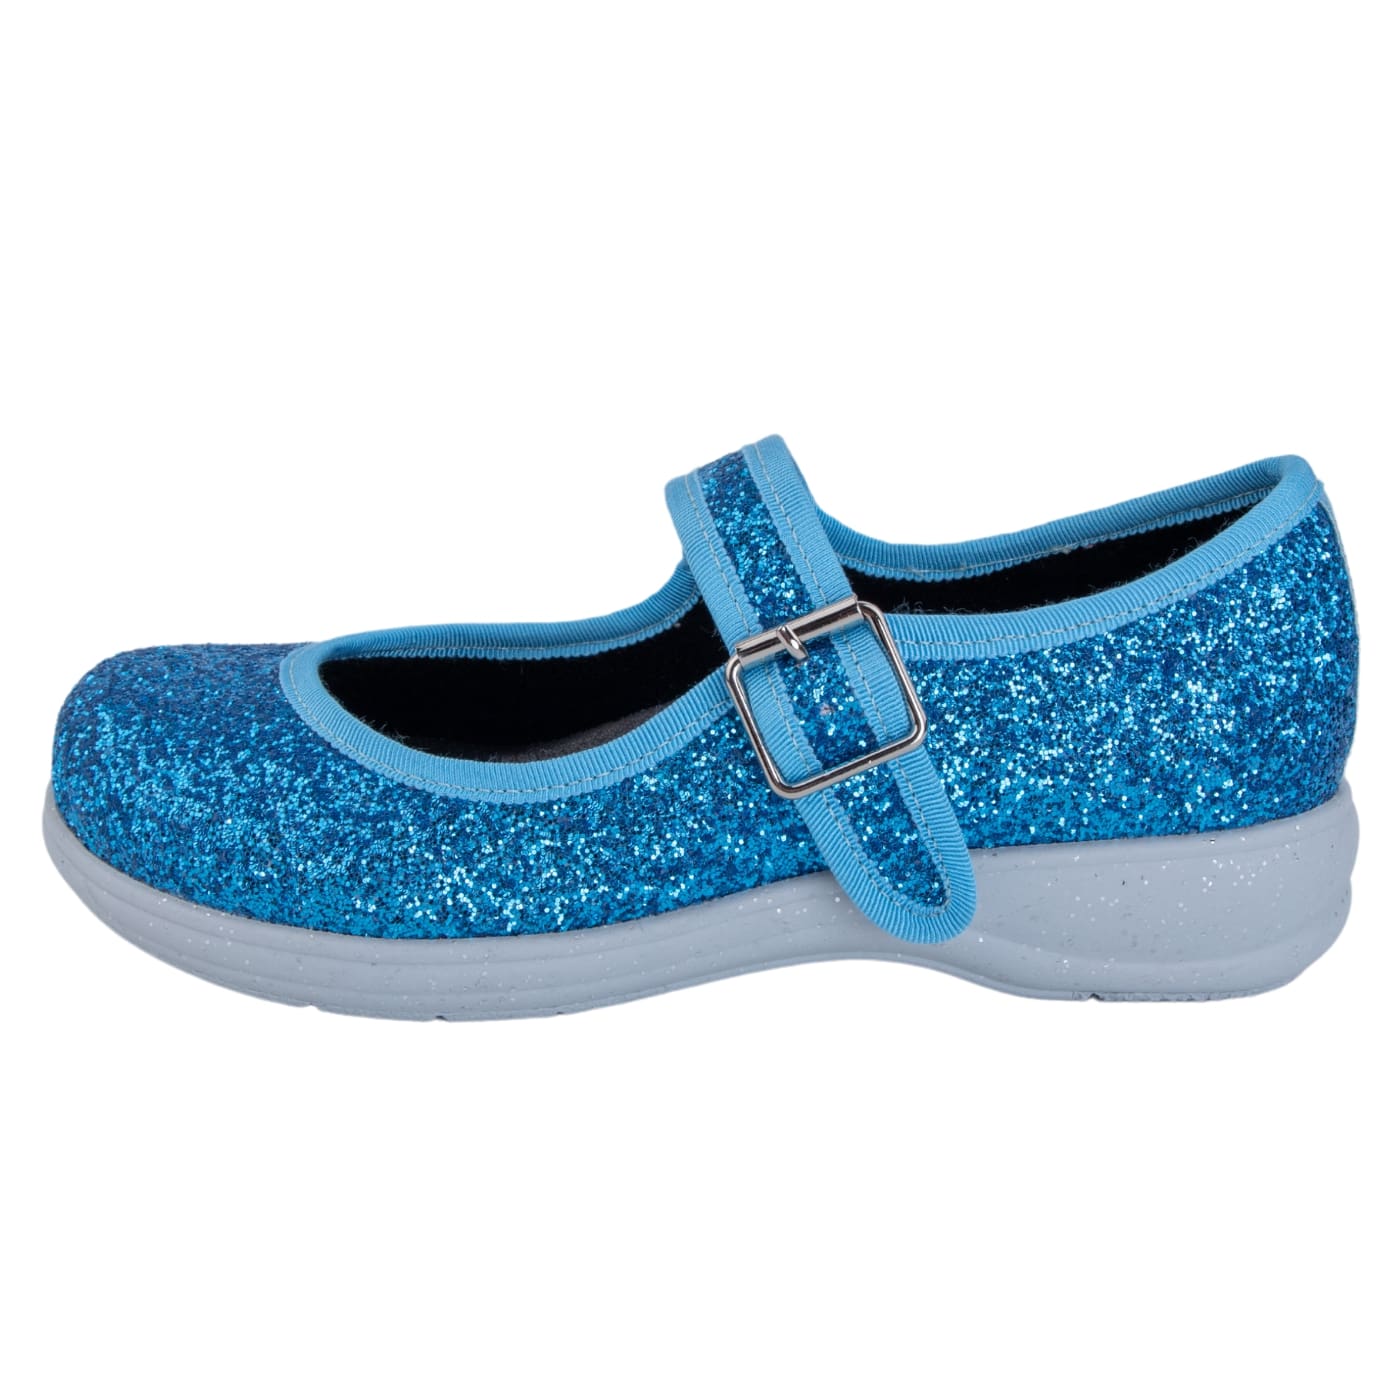 Serenity Mary Janes by RainbowsAndFairies.com.au (Aqua Glitter - Turquoise - Mismatched Shoes - Cute & Comfy - Buckle Up Shoes - Holographic - Glitter) - SKU: FW_MARYJ_GLITR_SER - Pic-04